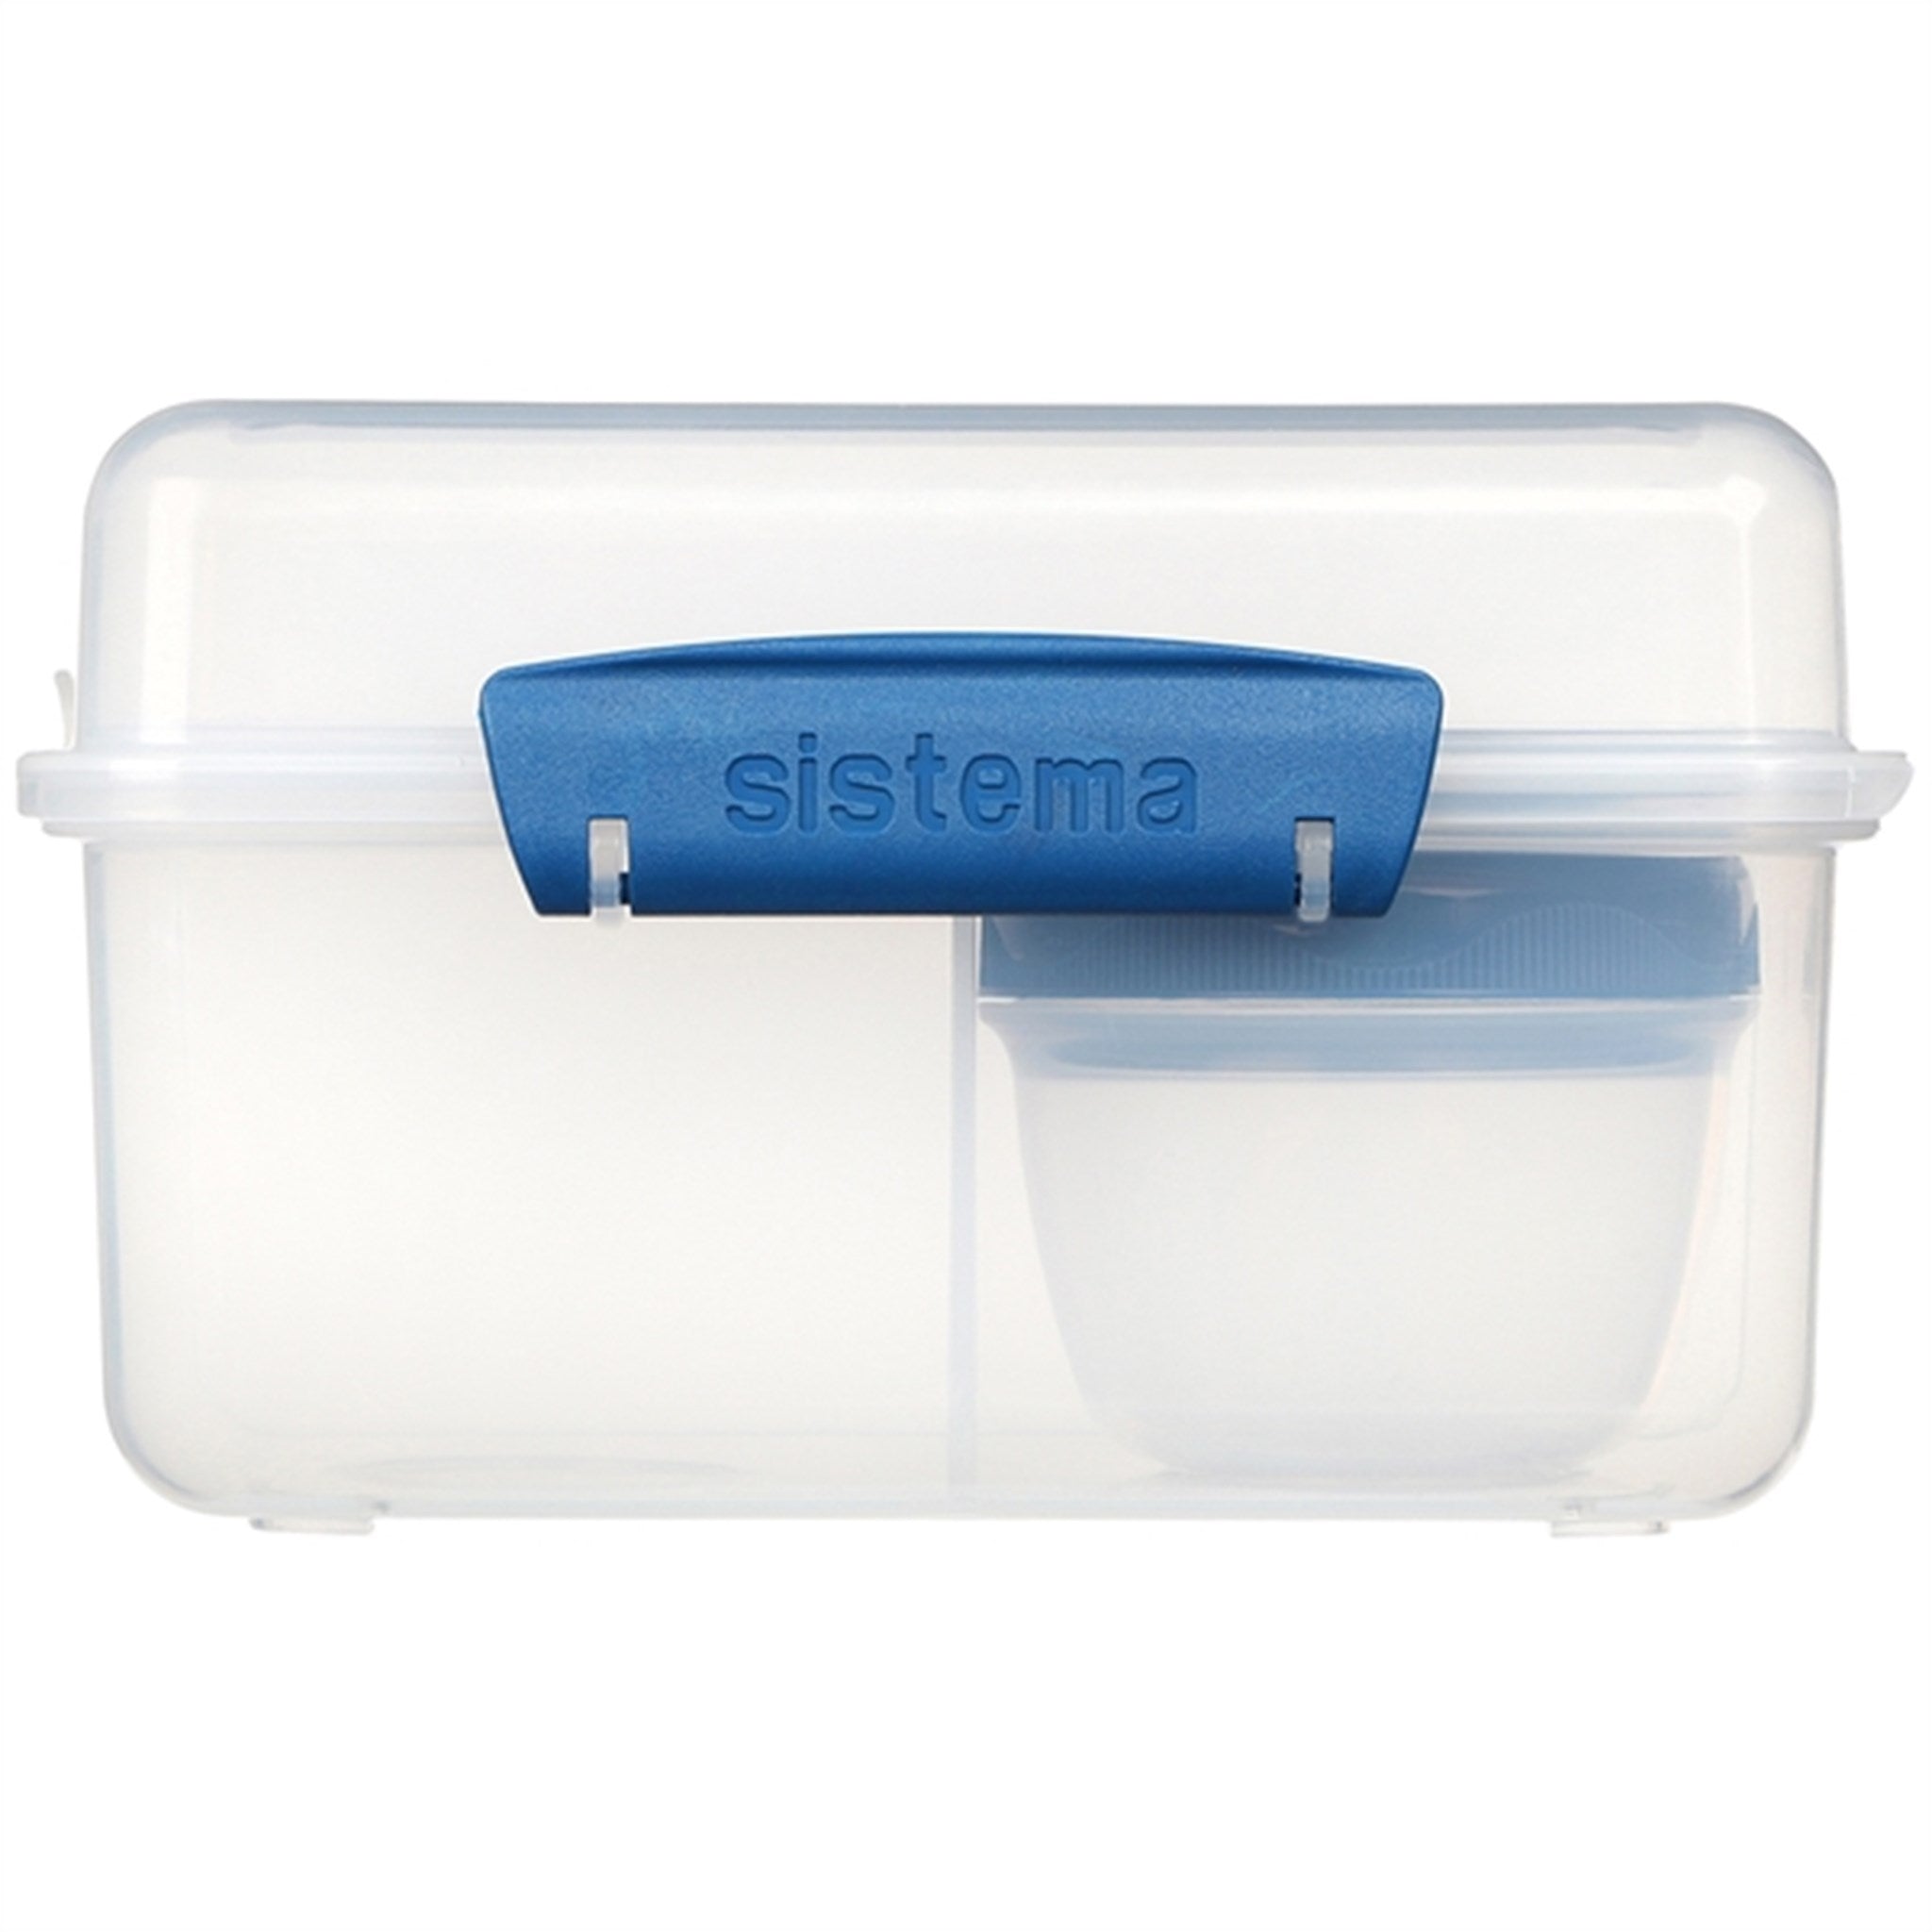 Sistema To Go Lunch Cube Max Lunchlåda 2 L Ocean Blue 2